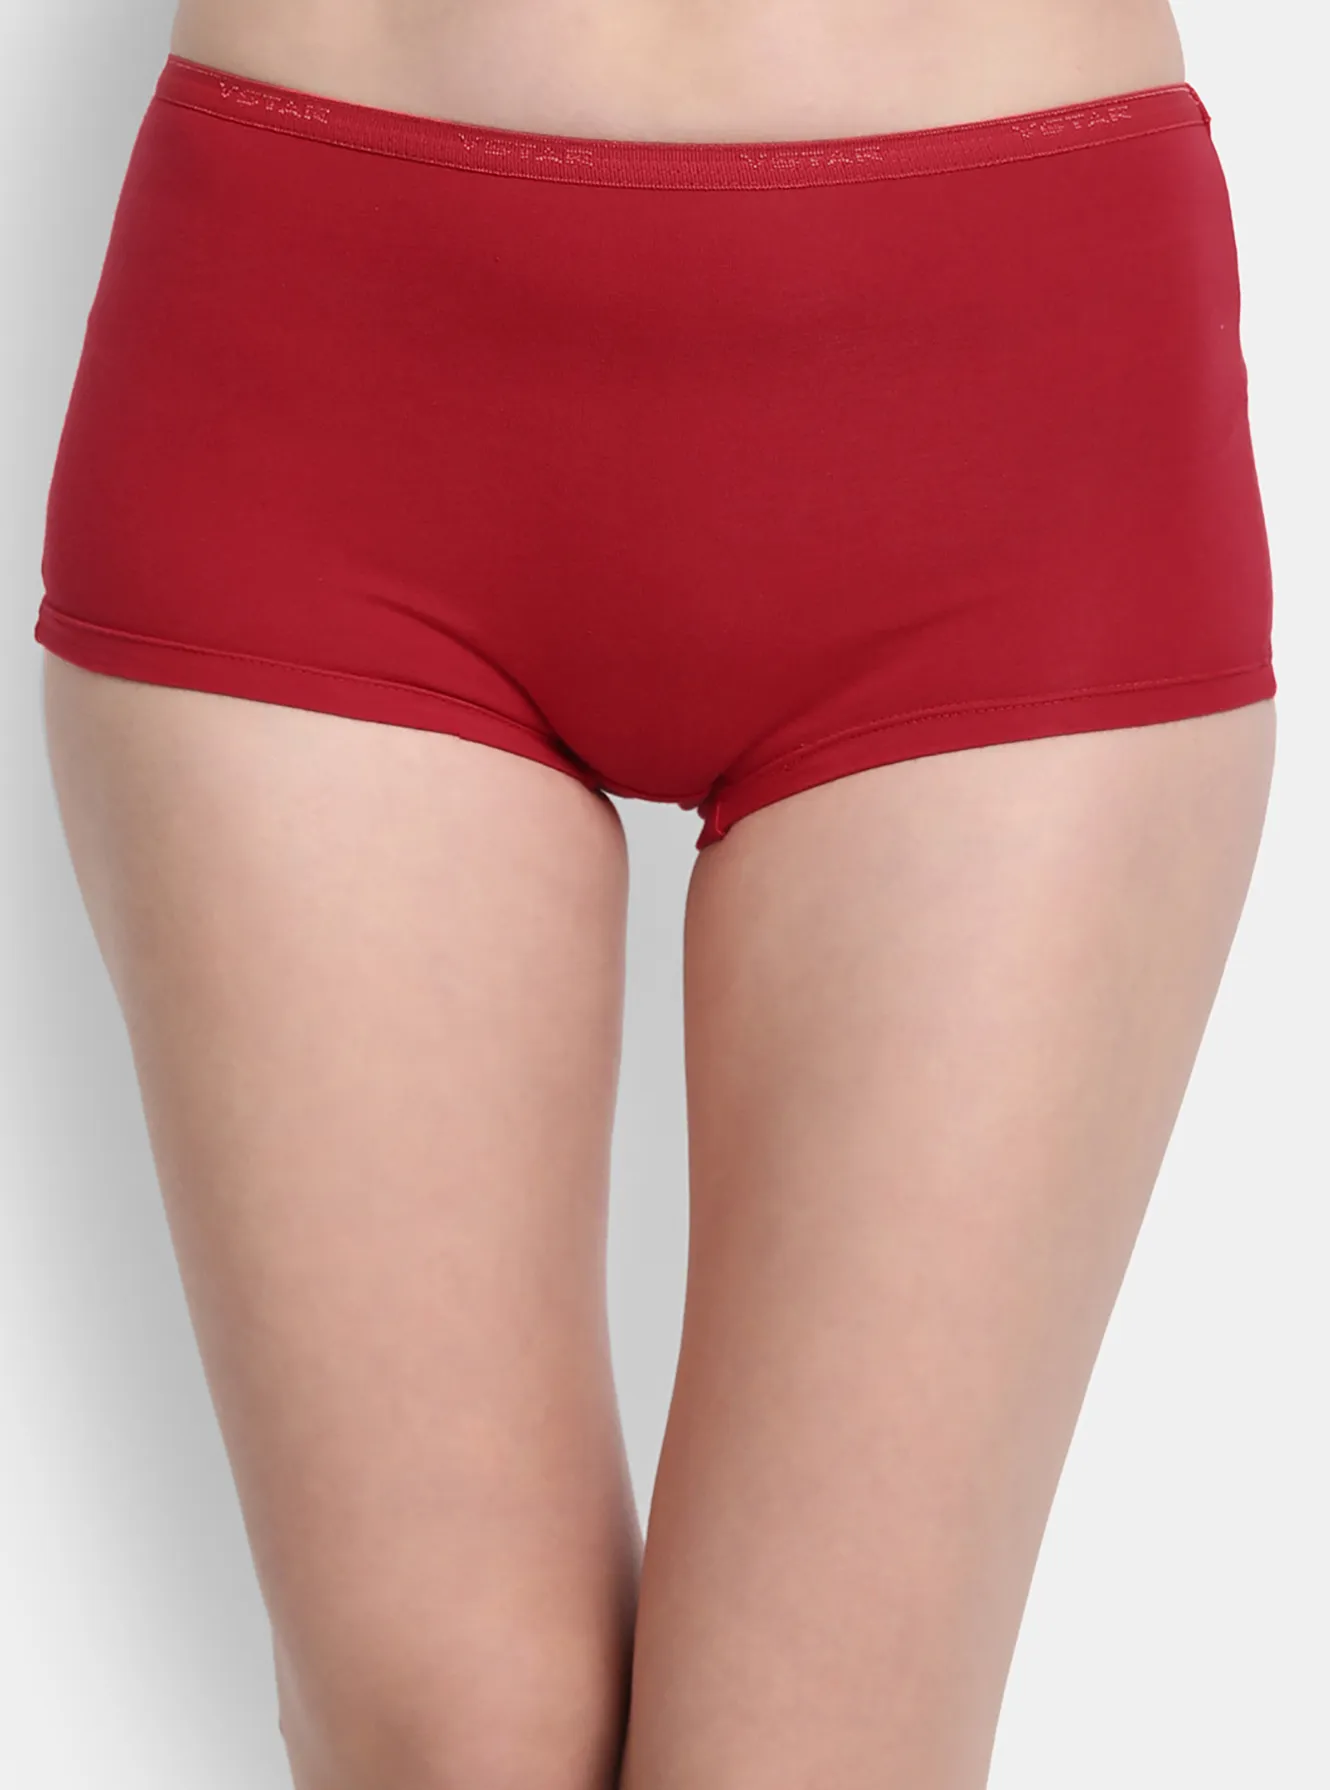 Mid rise boy short panty with extra leg coverage - Pack of 2